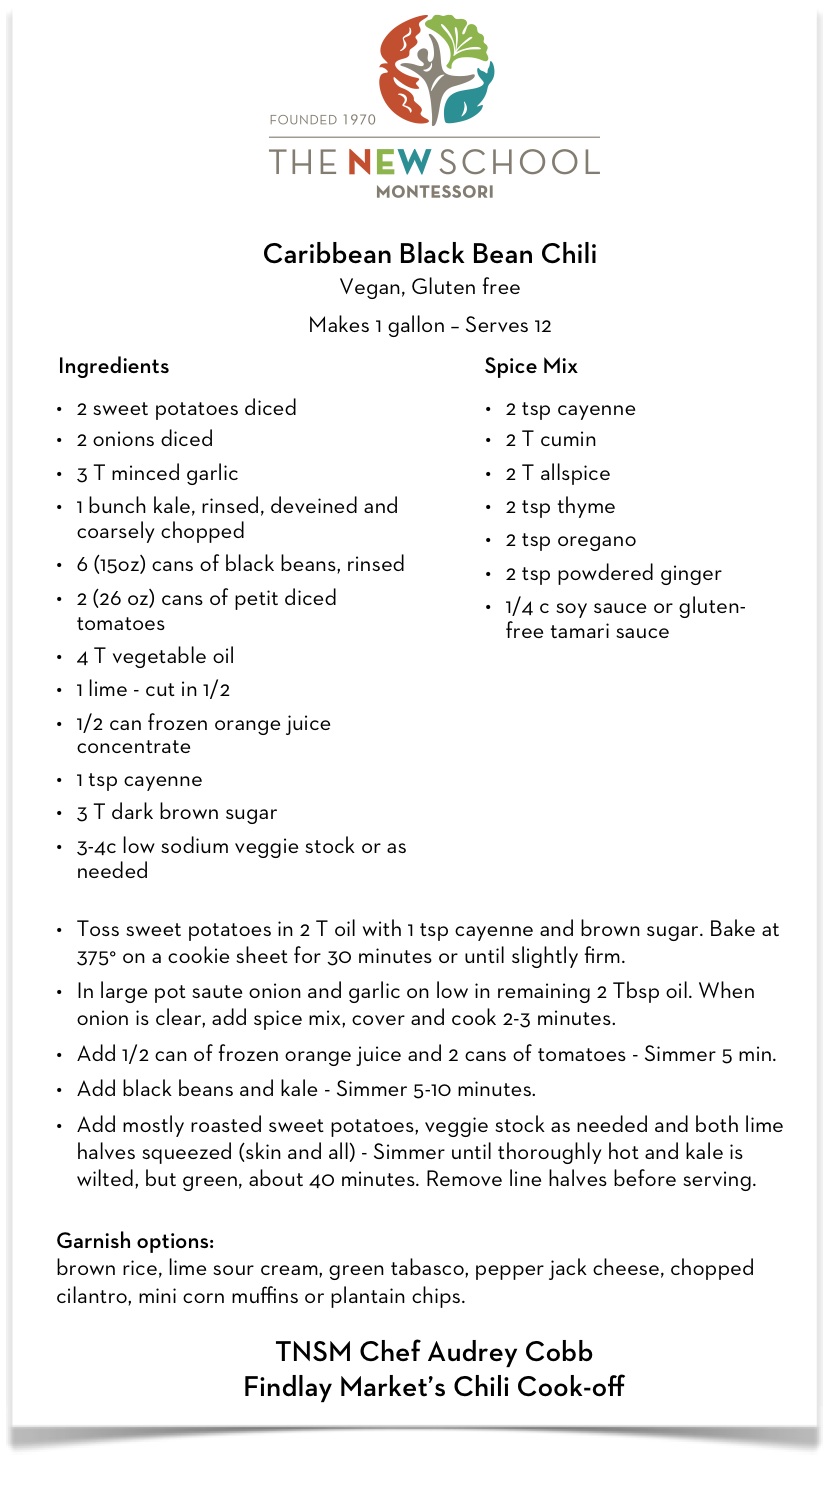 Chili Cook-Off Recipe 2014 6x10 for website